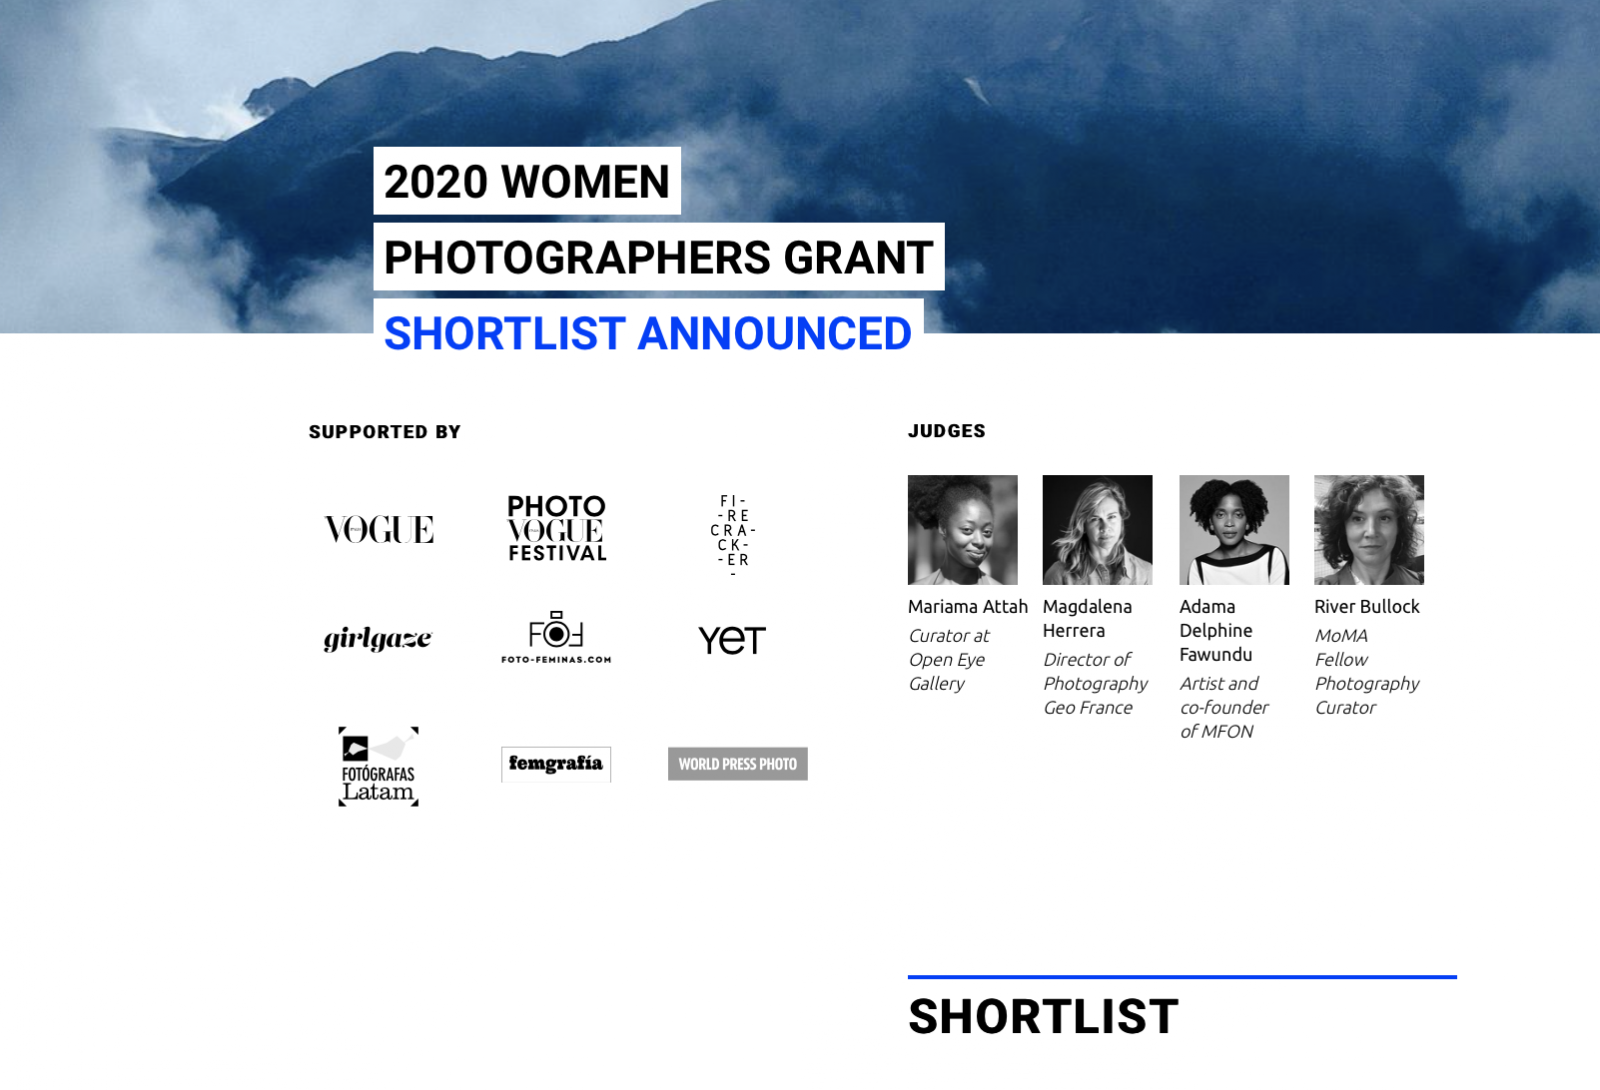 Thumbnail of Shortlisted for the 2020 PH Museum Women Photographers Grant!